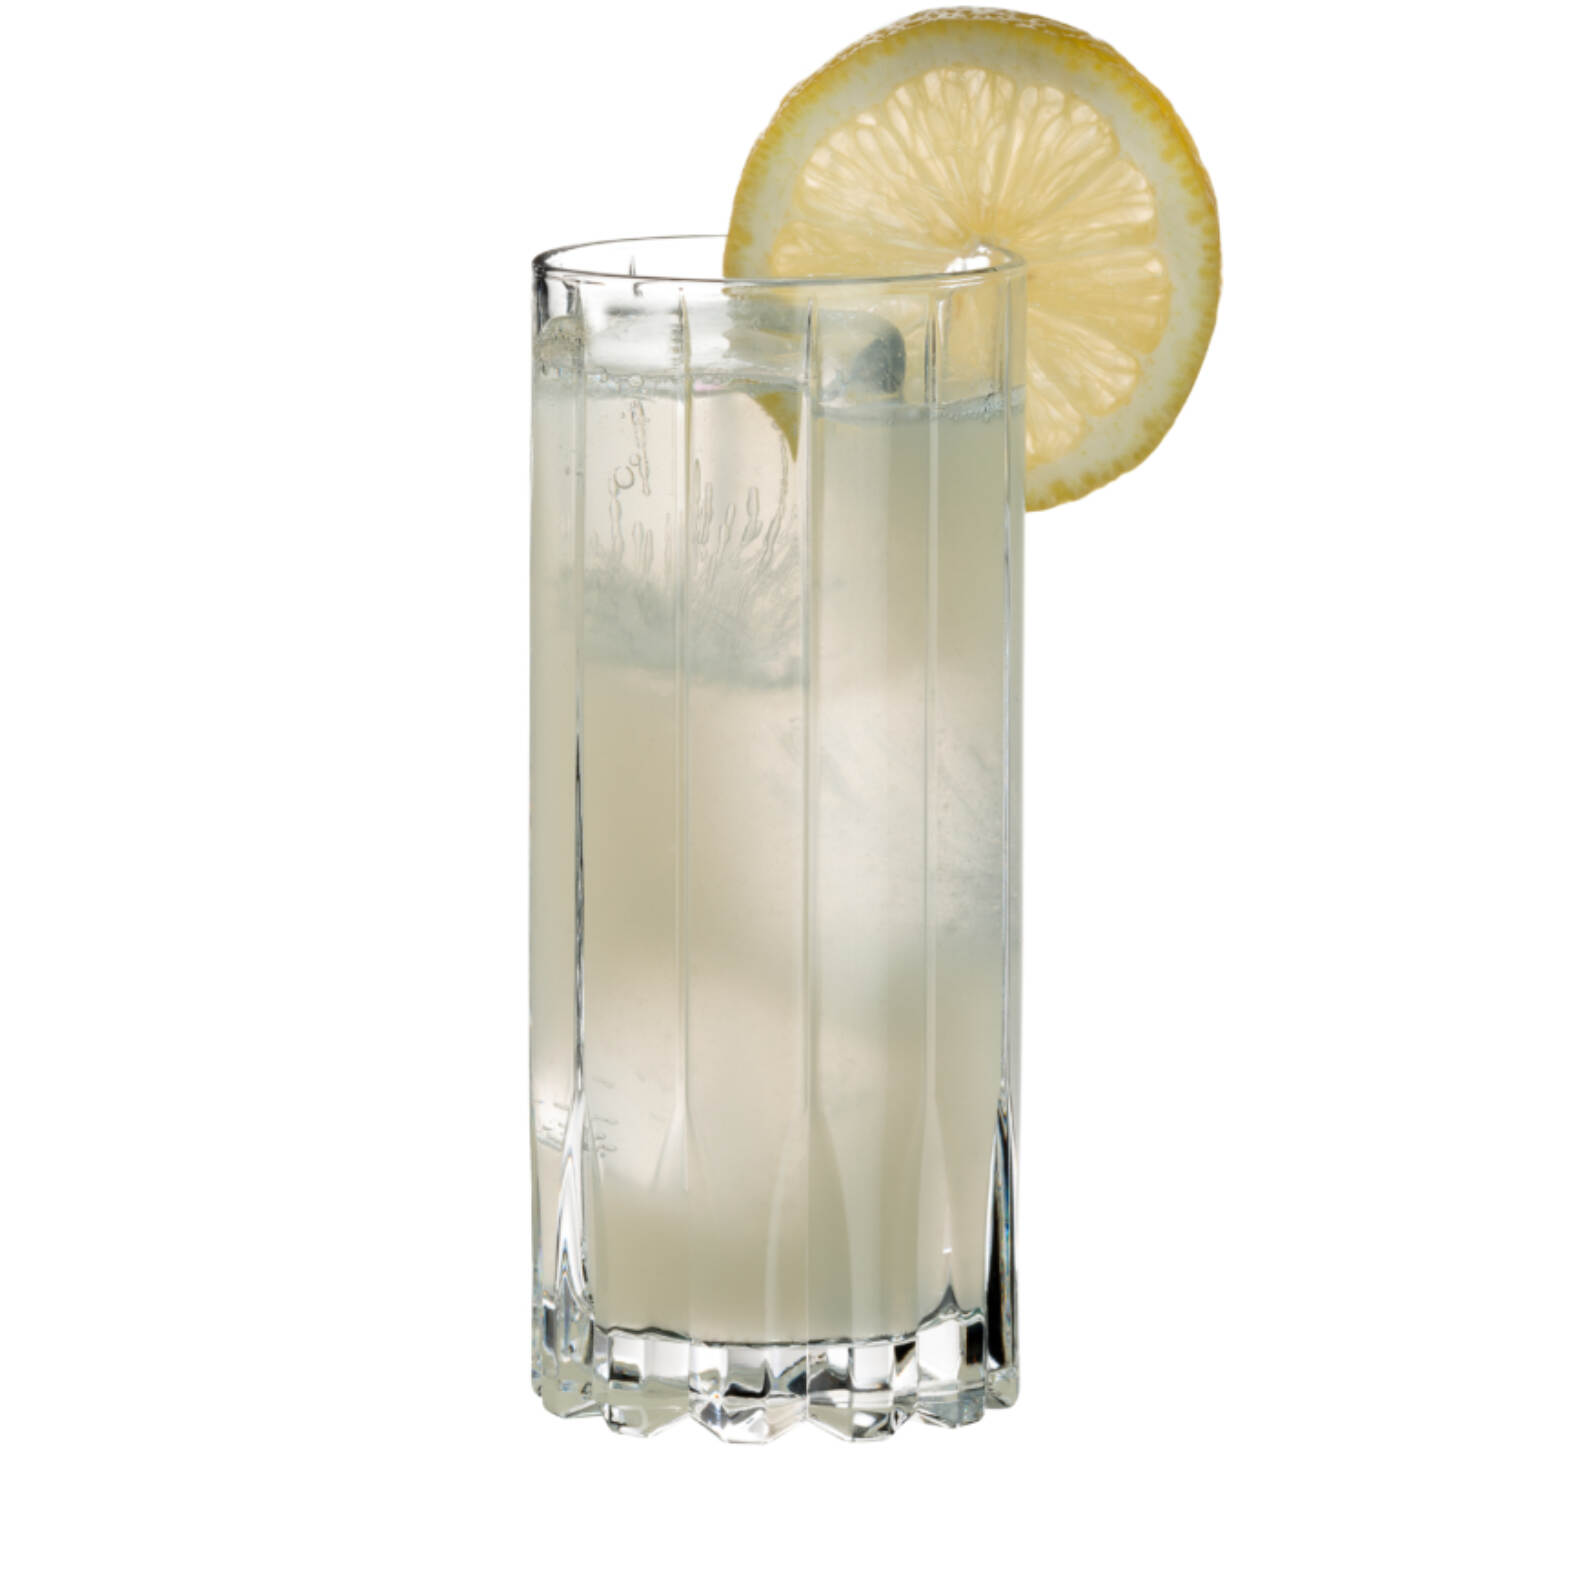 0417-04_Drink-Specific-Glassware_Highball_white_filled_1